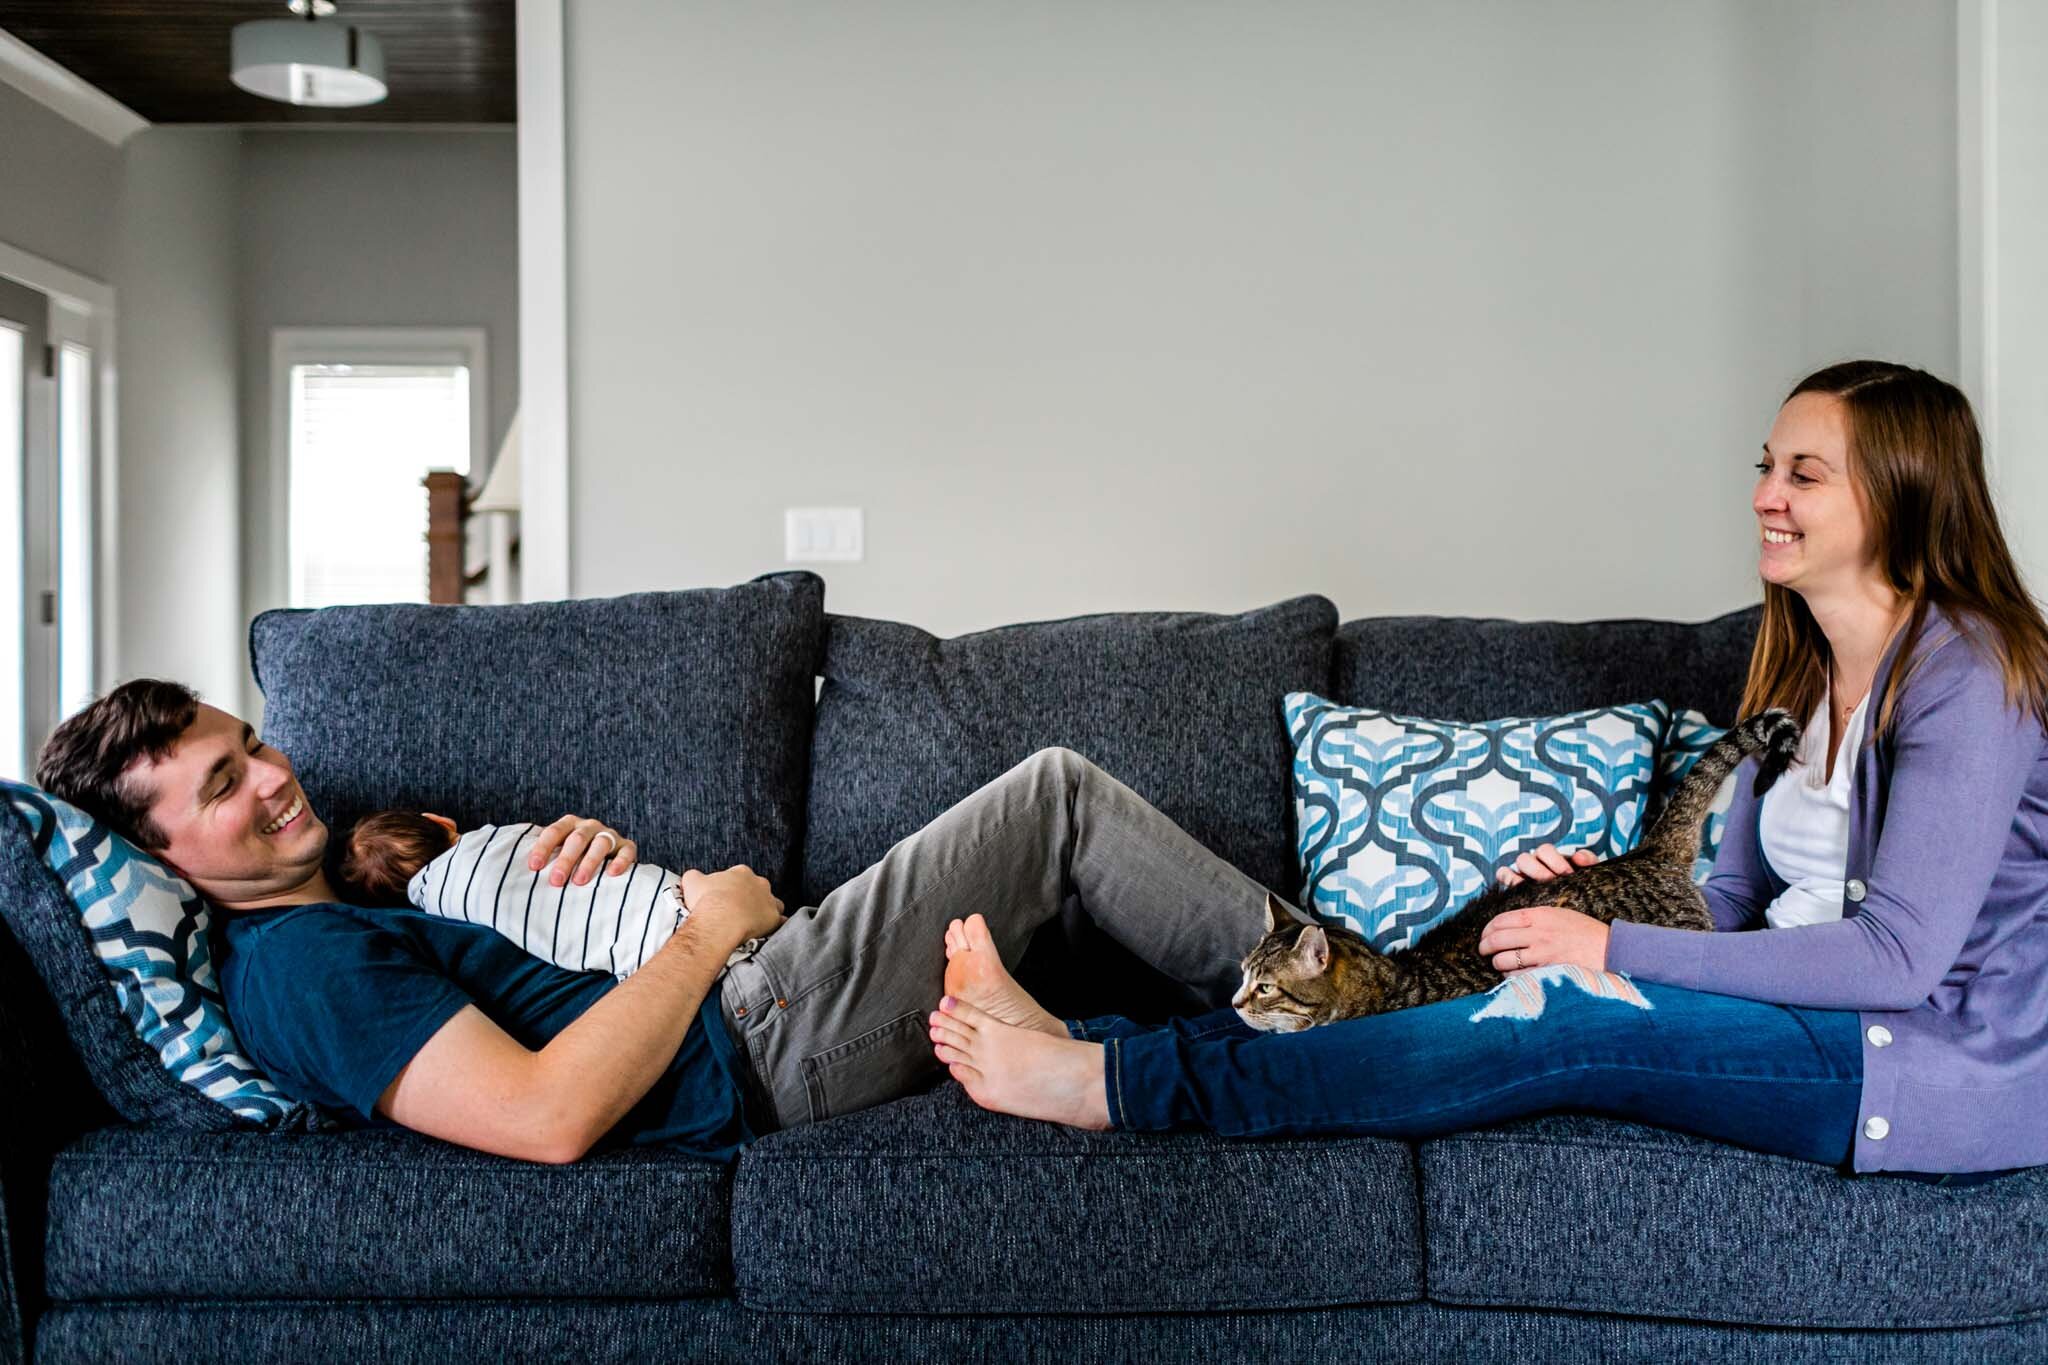 Durham Newborn Photographer | By G. Lin Photography | Relaxing family shot sitting on couch in living room